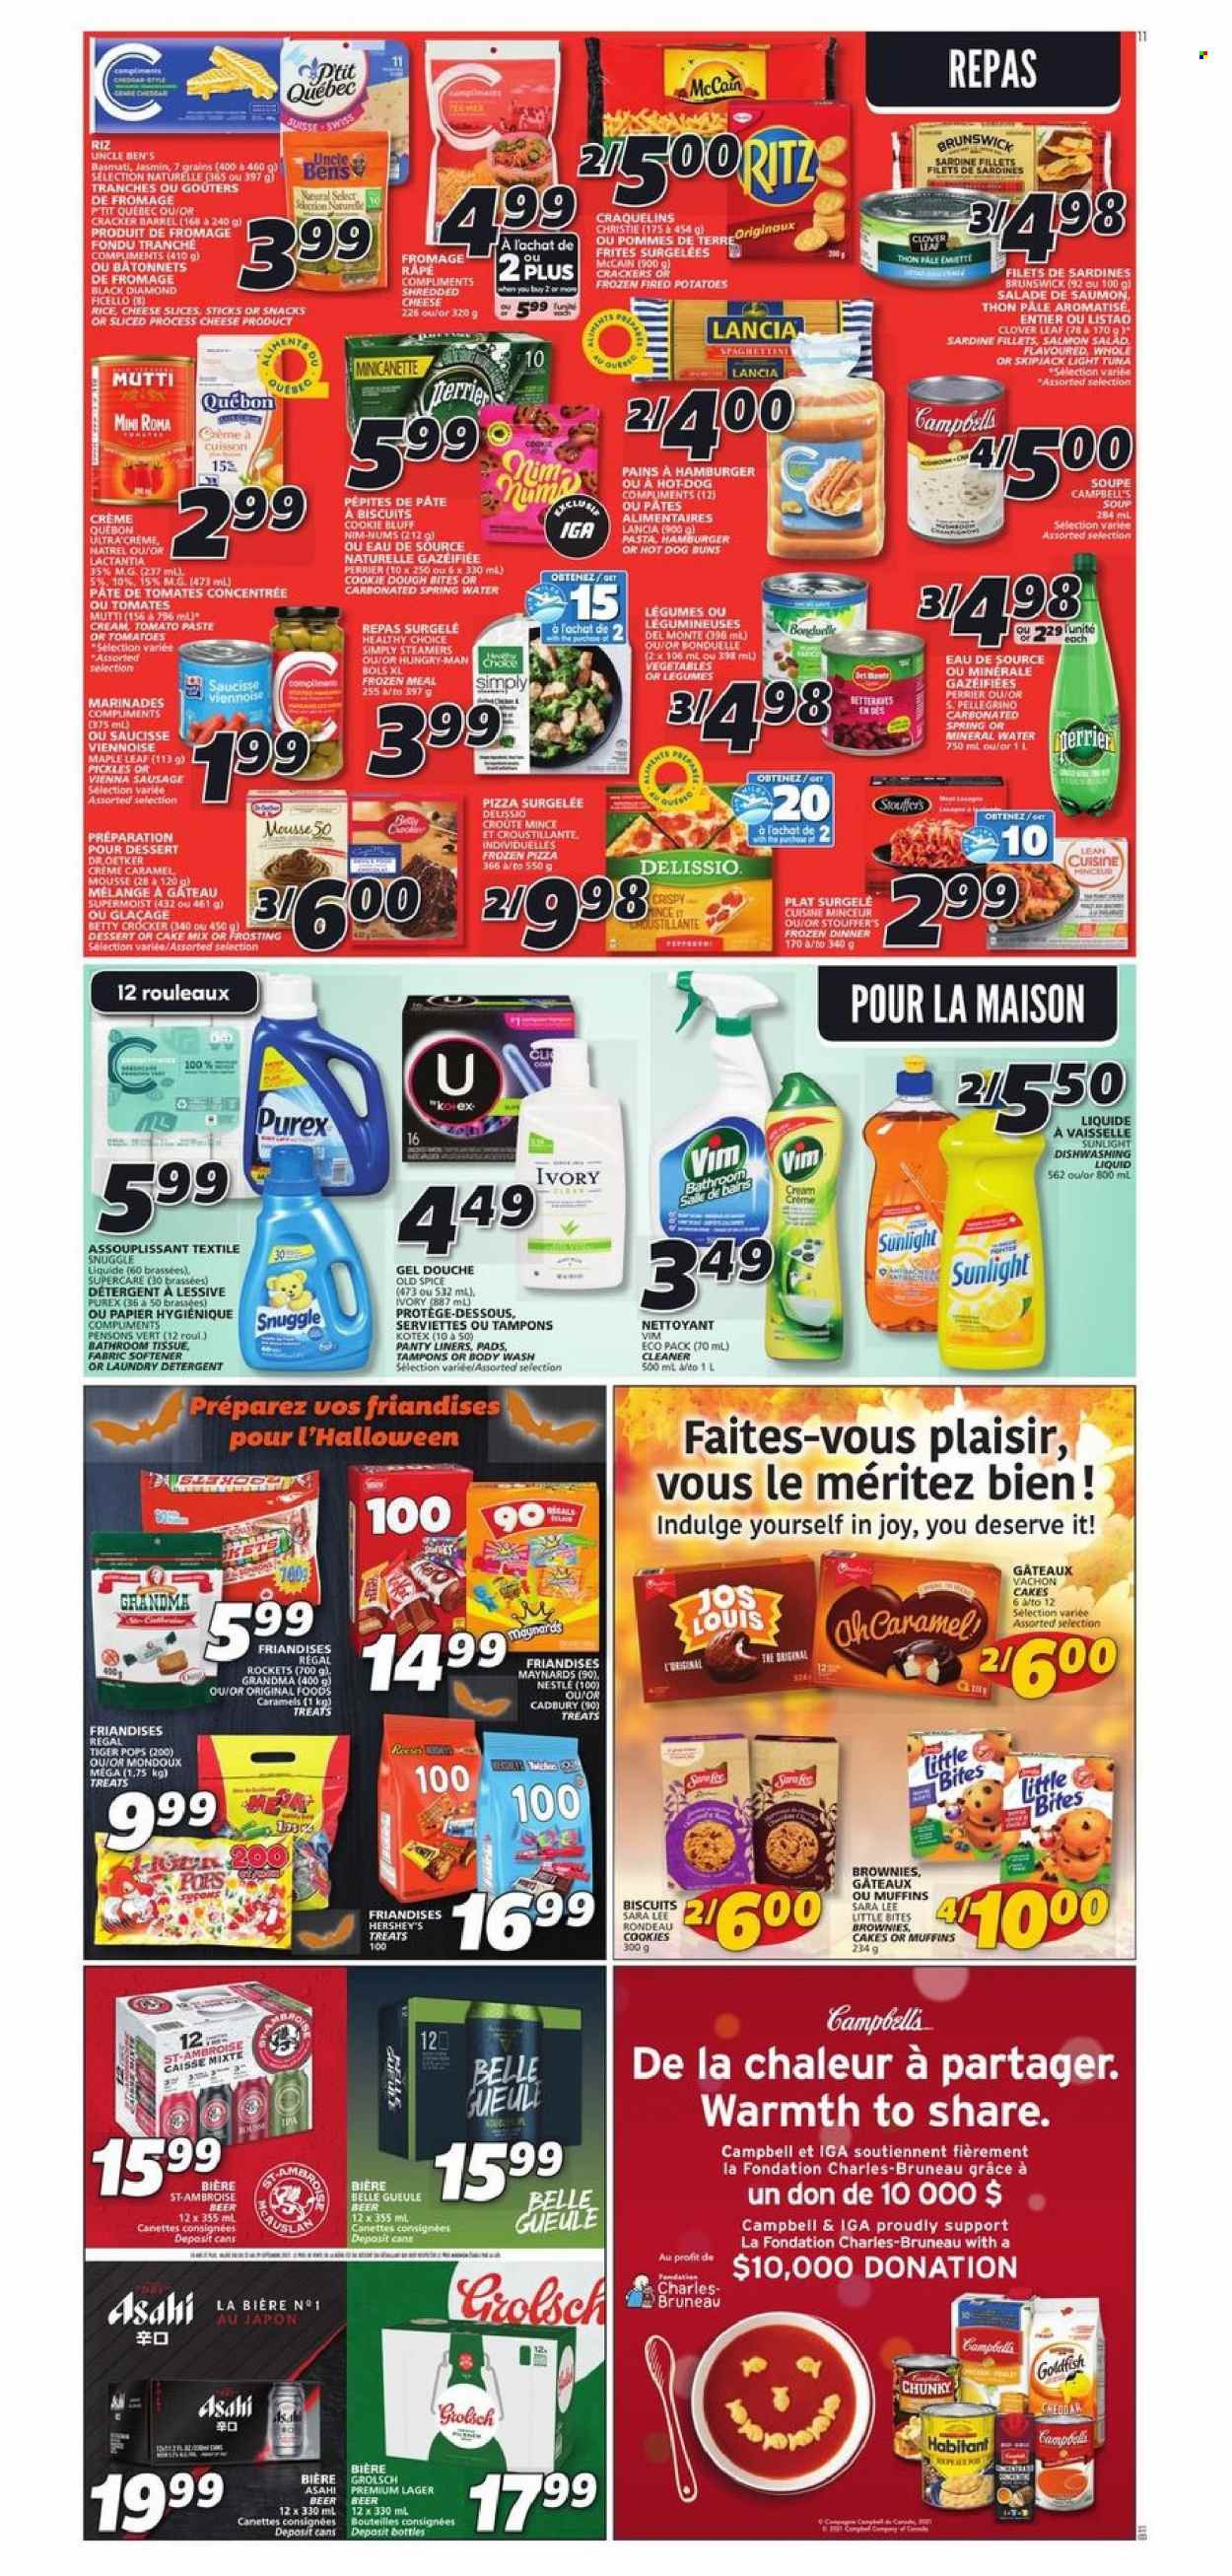 thumbnail - IGA Flyer - September 23, 2021 - September 29, 2021 - Sales products - buns, Sara Lee, cake mix, potatoes, salmon, sardines, tuna, Campbell's, pizza, soup, Healthy Choice, sausage, vienna sausage, shredded cheese, sliced cheese, Dr. Oetker, Clover, Hershey's, McCain, cookie dough, cookies, crackers, biscuit, Cadbury, Little Bites, Goldfish, frosting, tomato paste, pickles, light tuna, Uncle Ben's, basmati rice, spice, caramel, Perrier, mineral water, spring water, San Pellegrino, beer, Grolsch, Lager, IPA, Nestlé, Old Spice. Page 10.